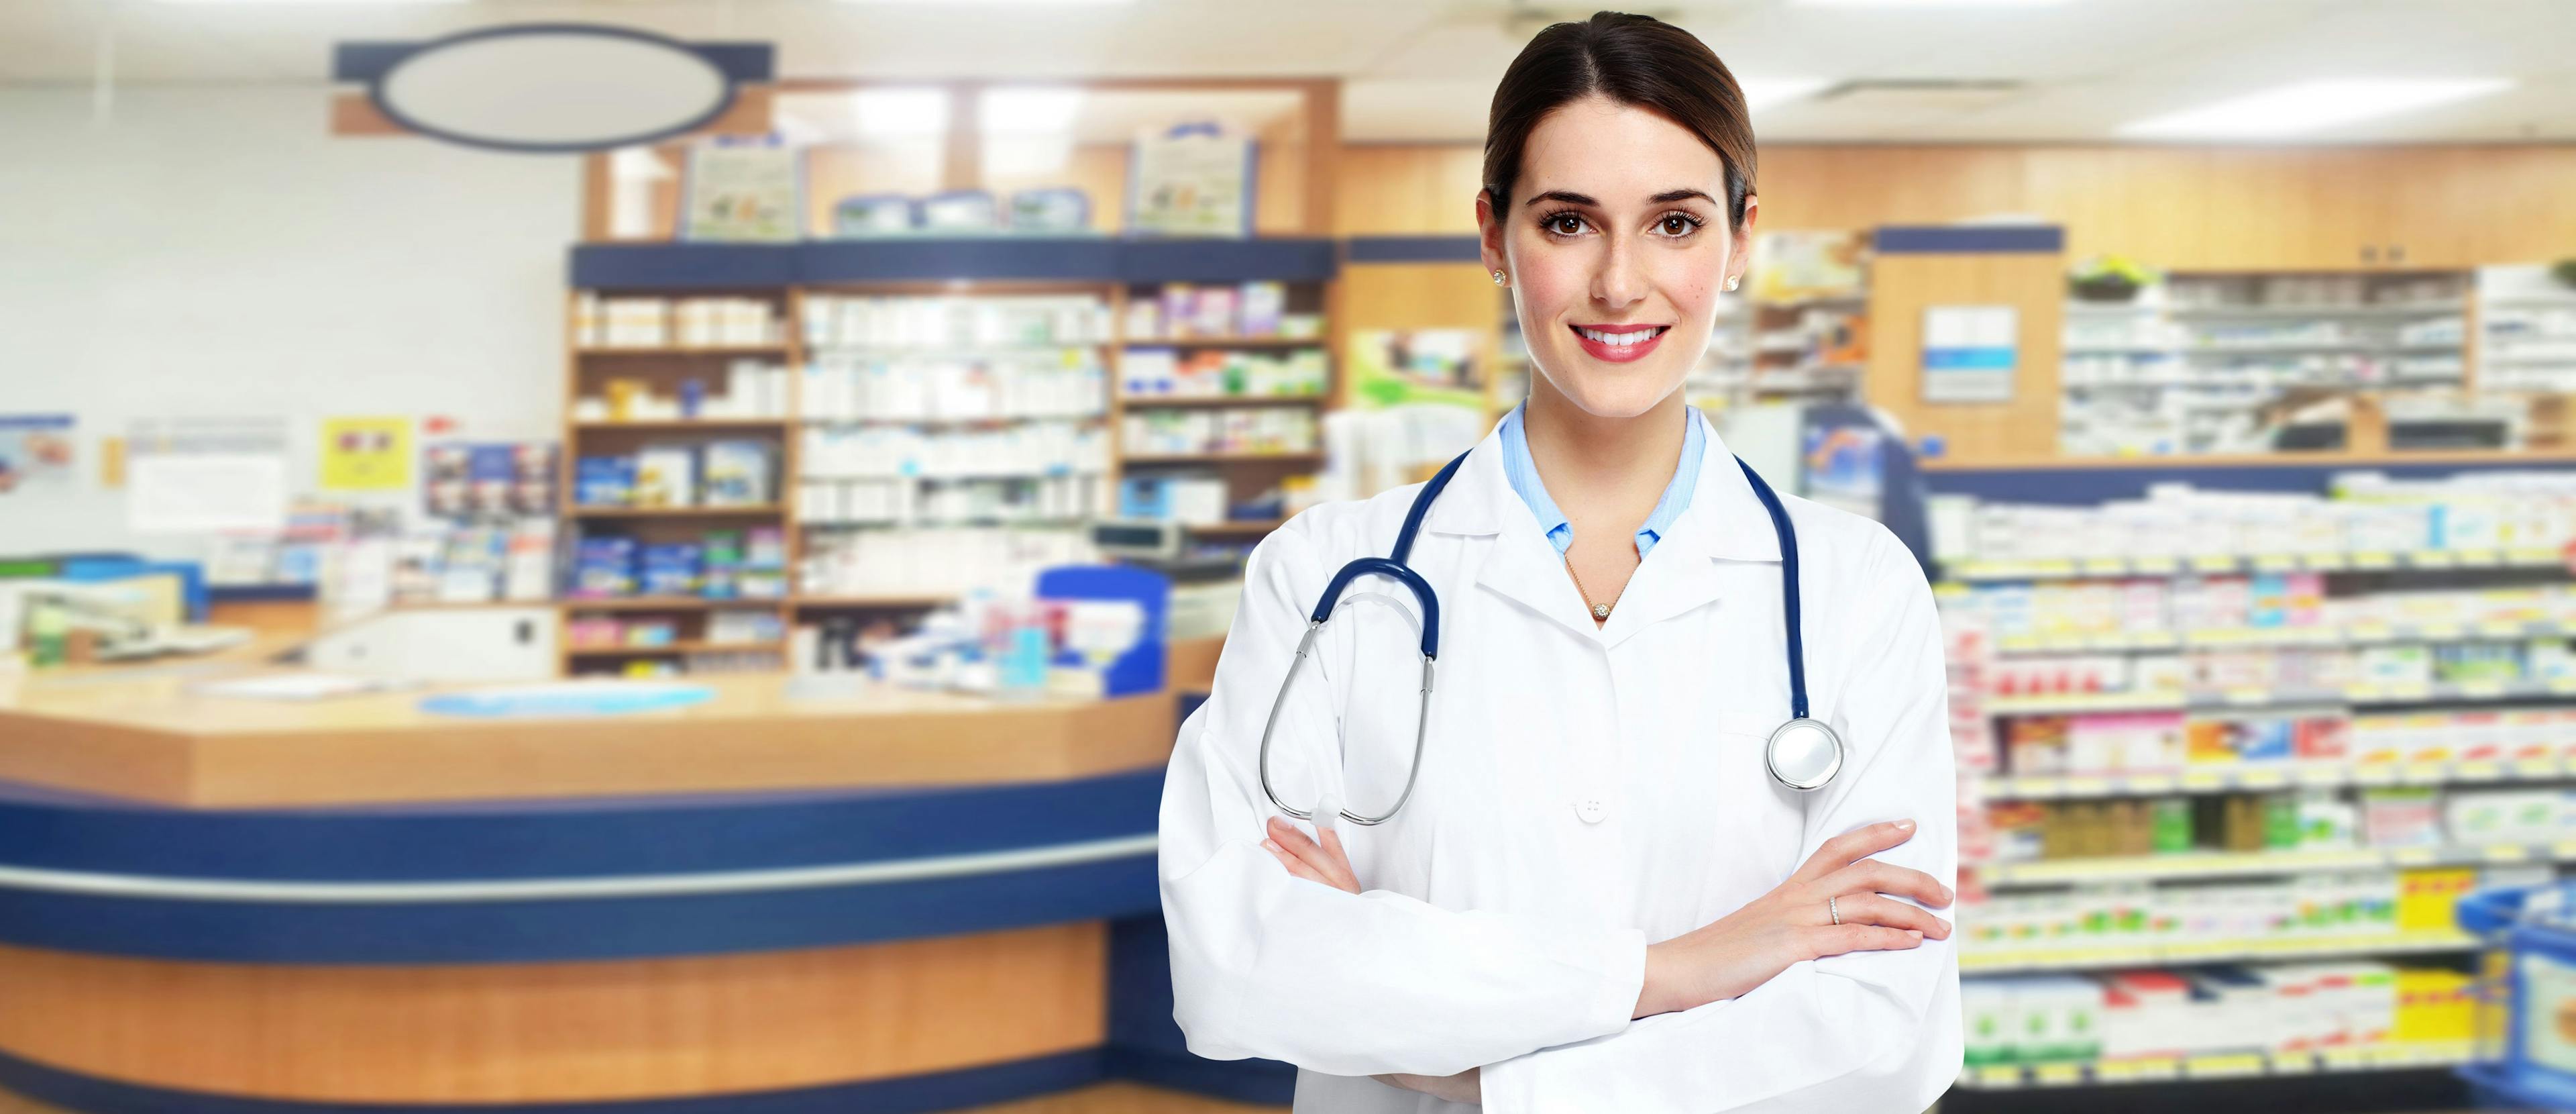 Top 5 Pharmacist Personality Traits